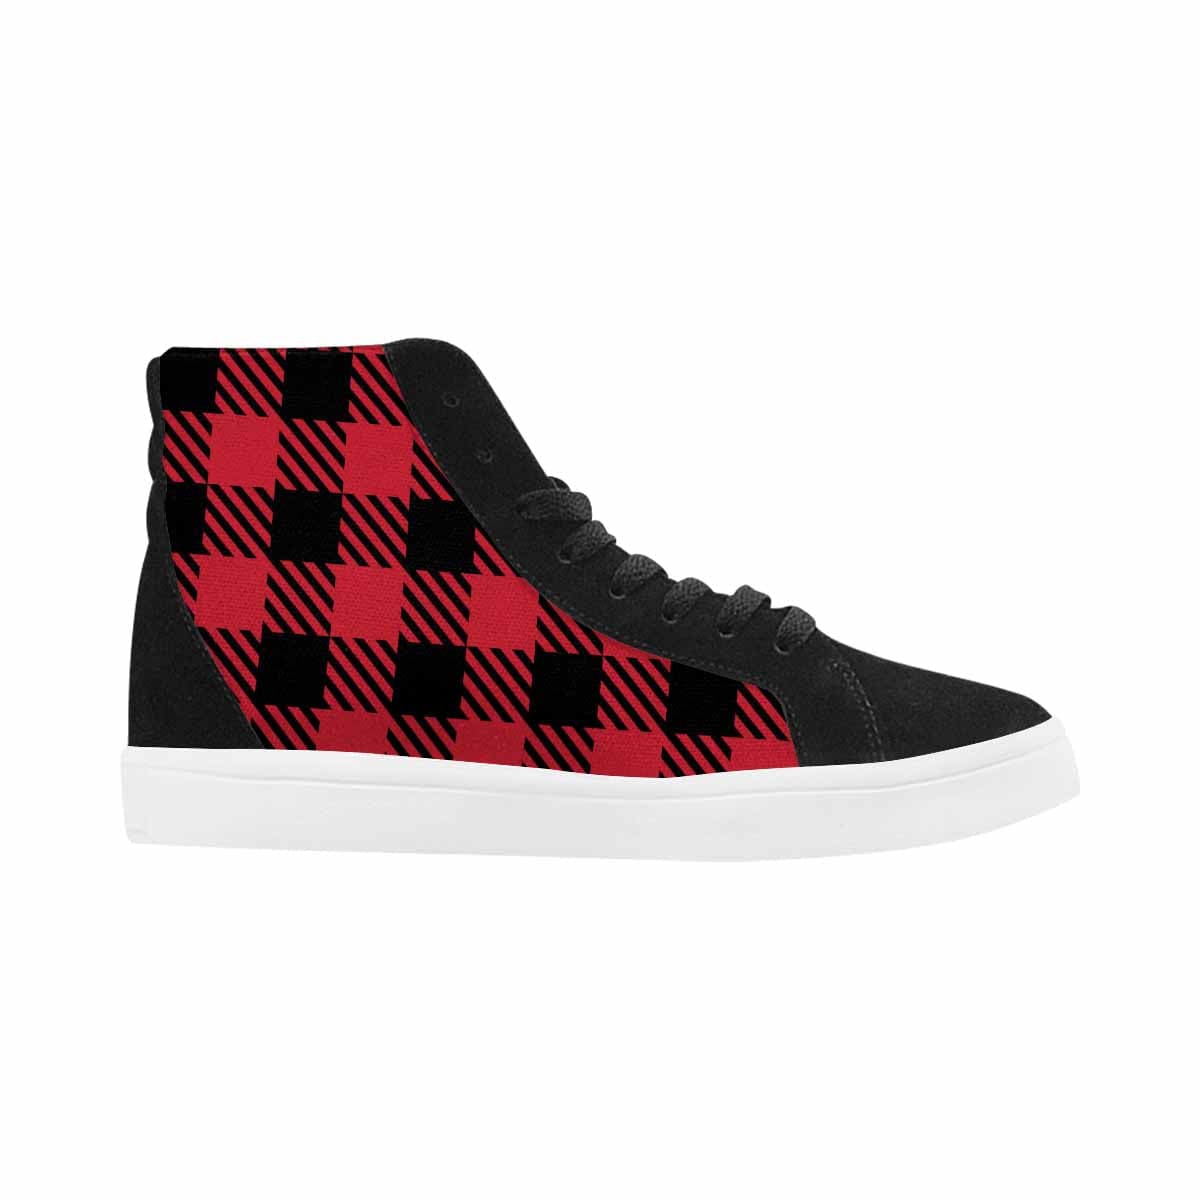 Uniquely You Sneakers for Men, Red and Black Buffalo Plaid - High Top Sports Shoes - Scarvesnthangs